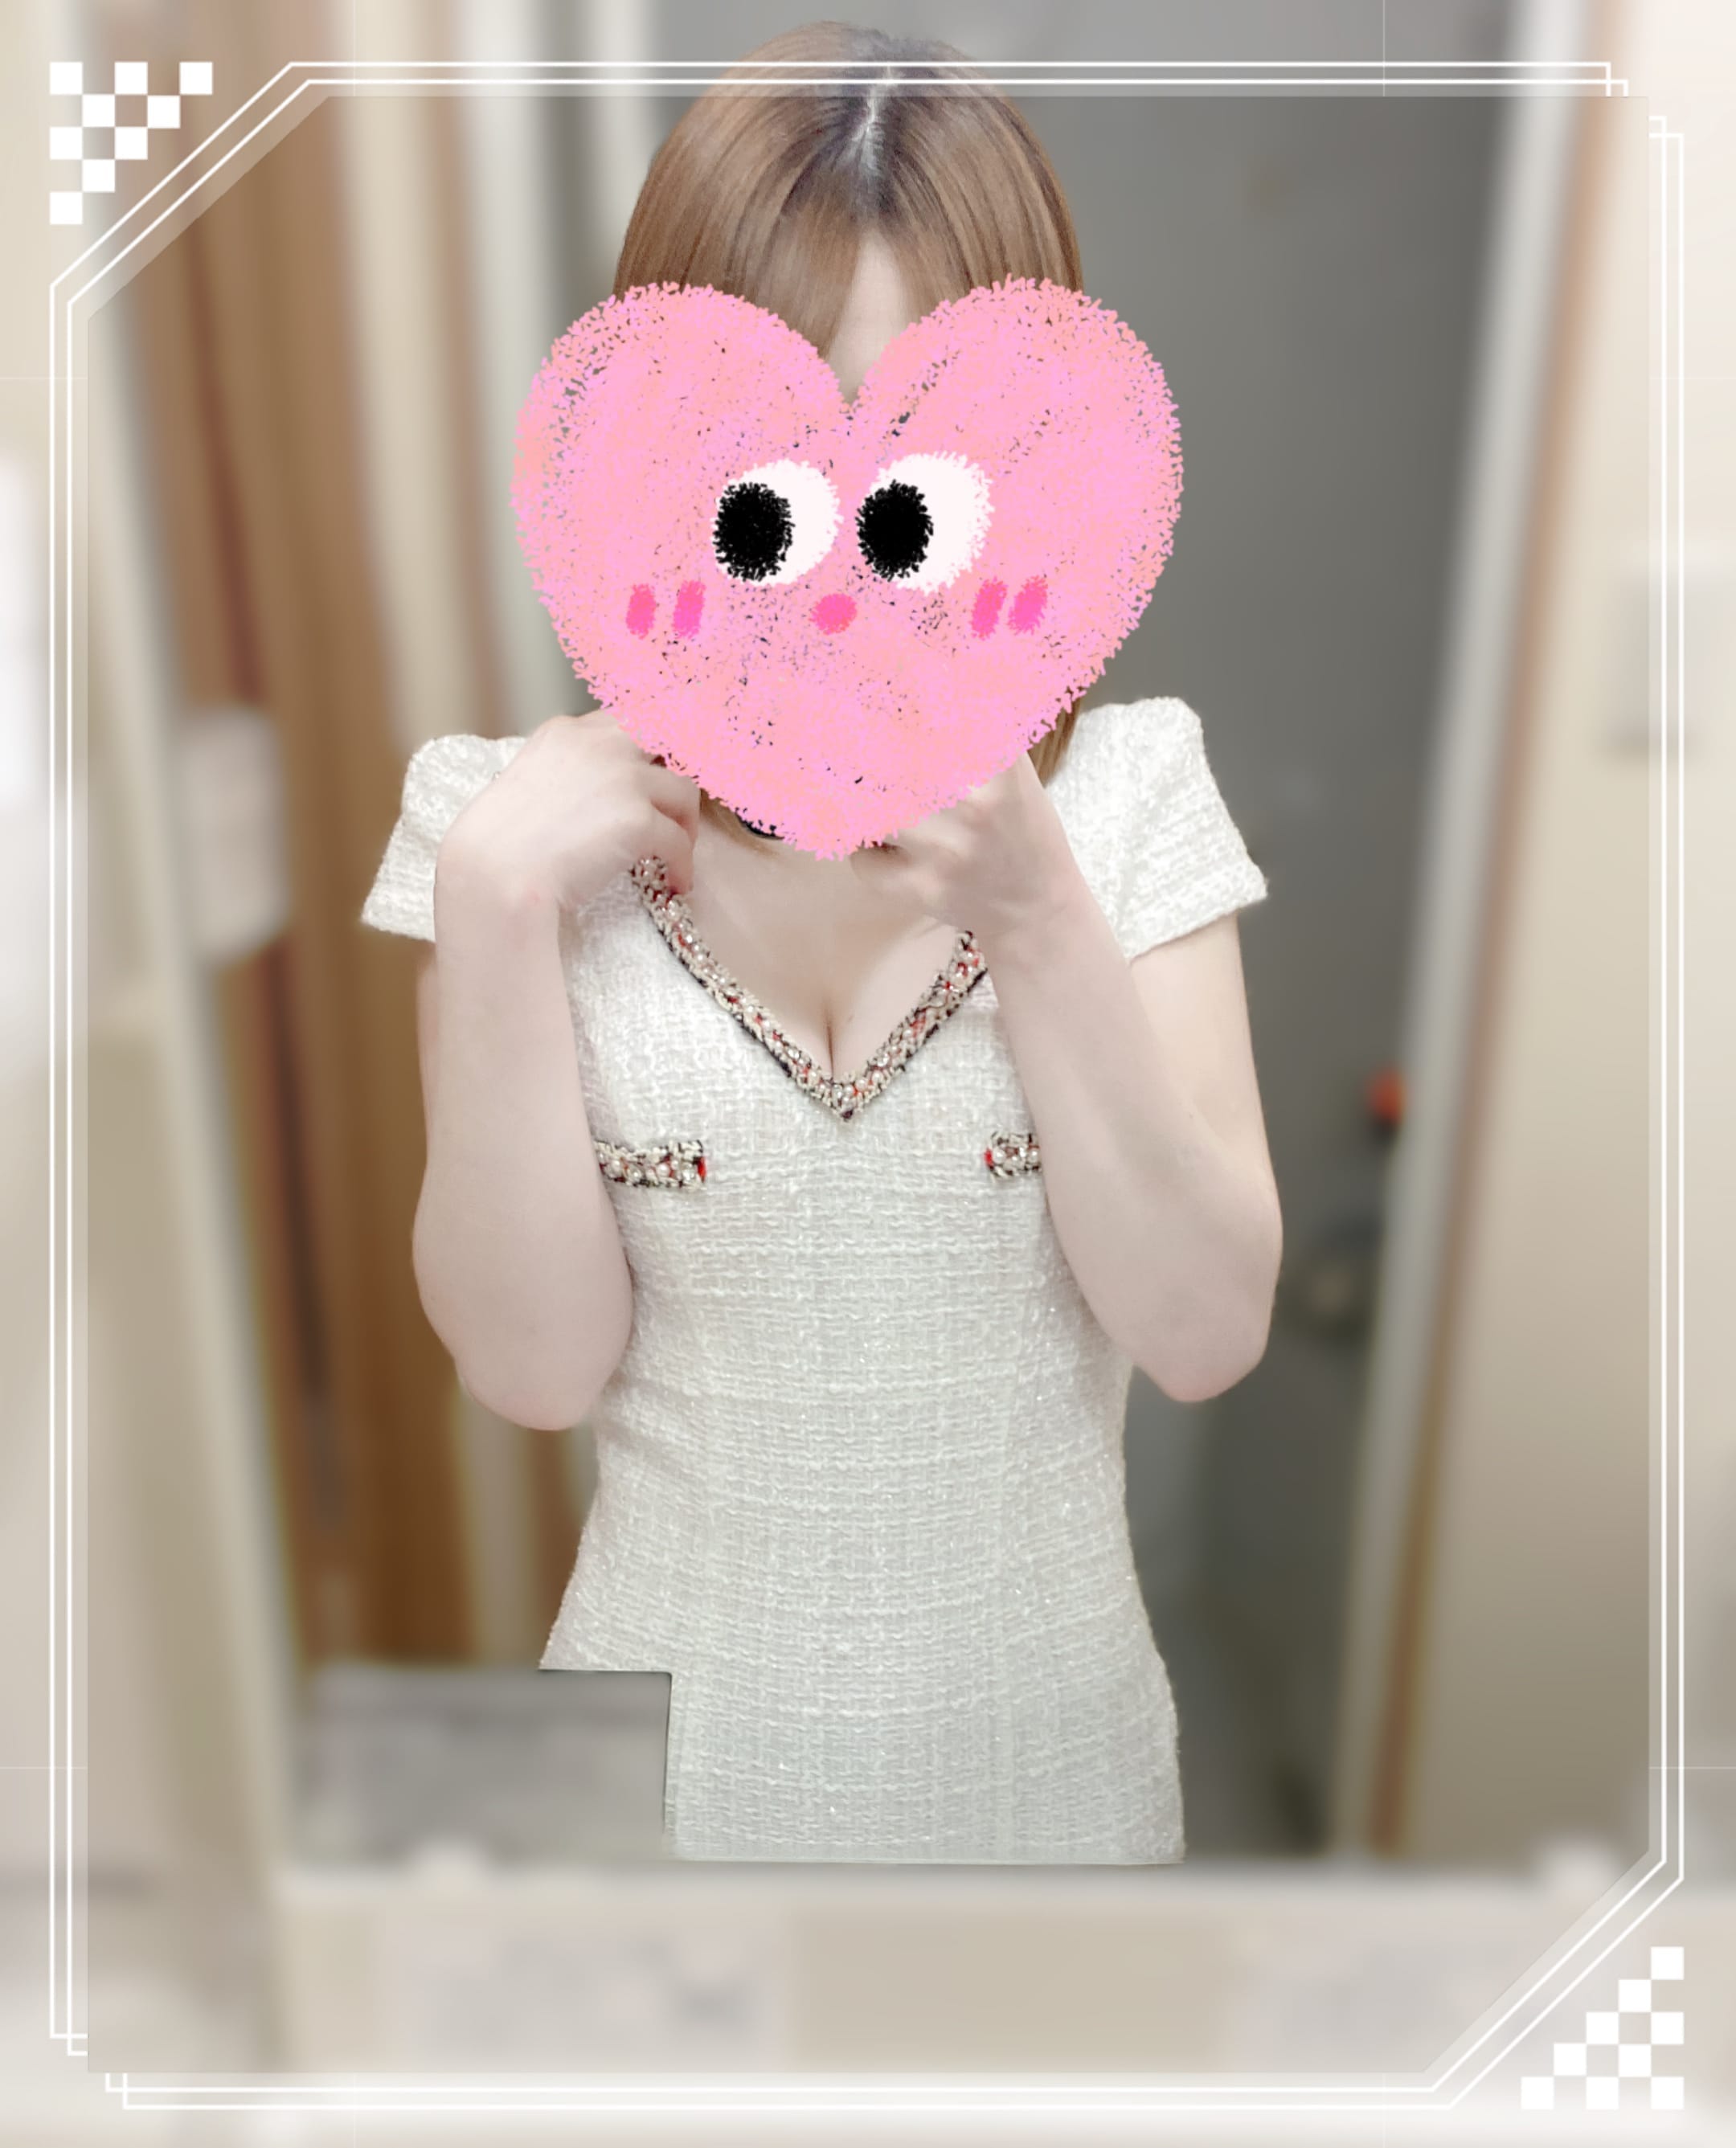 「〇〇DAY♡」01/21(日) 10:43 | 小暮 七菜の写メ日記